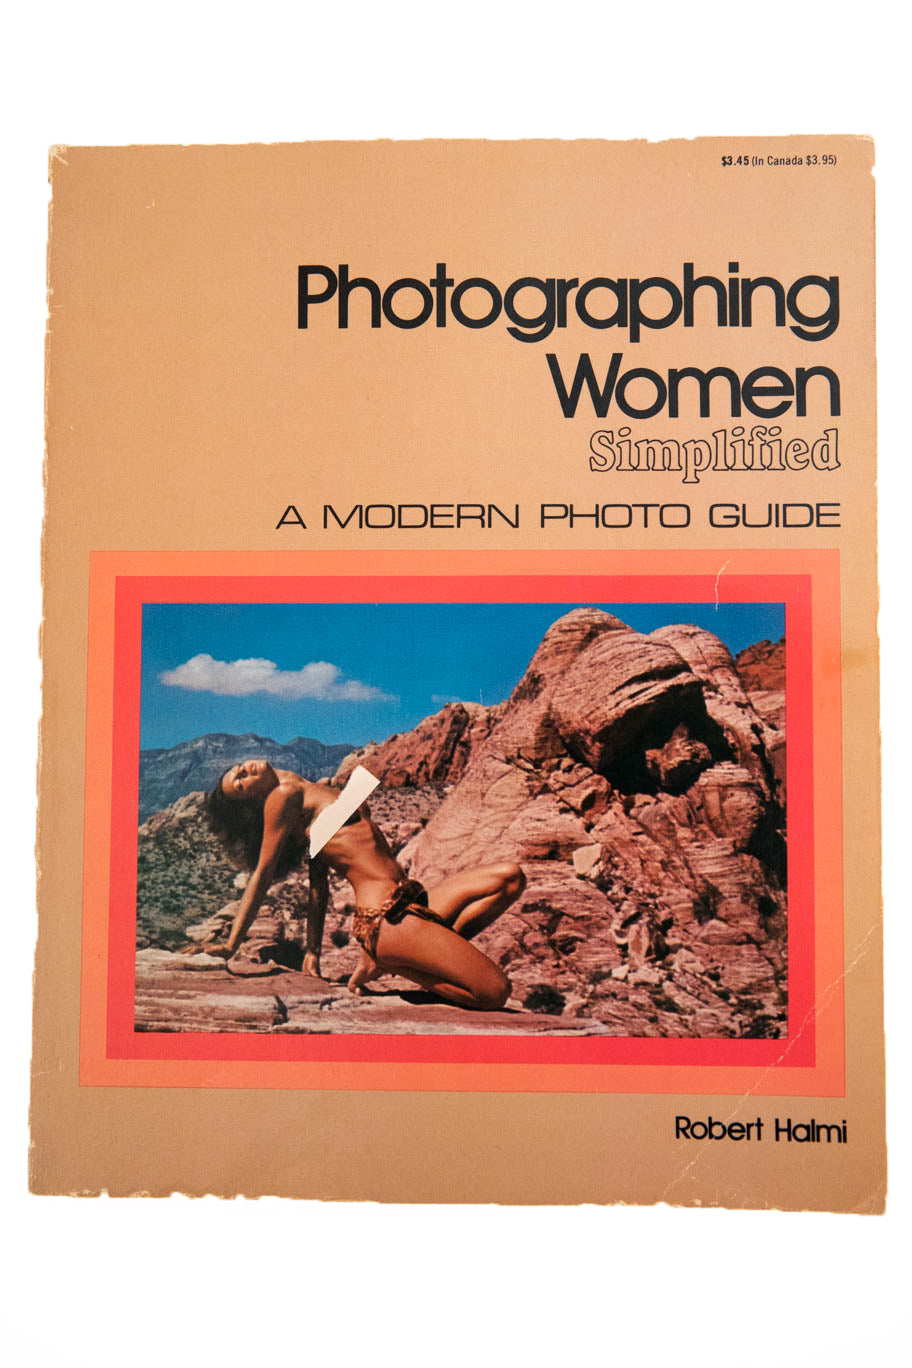 PHOTOGRAPHING WOMEN SIMPLIFIED | A Modern Photo Guide